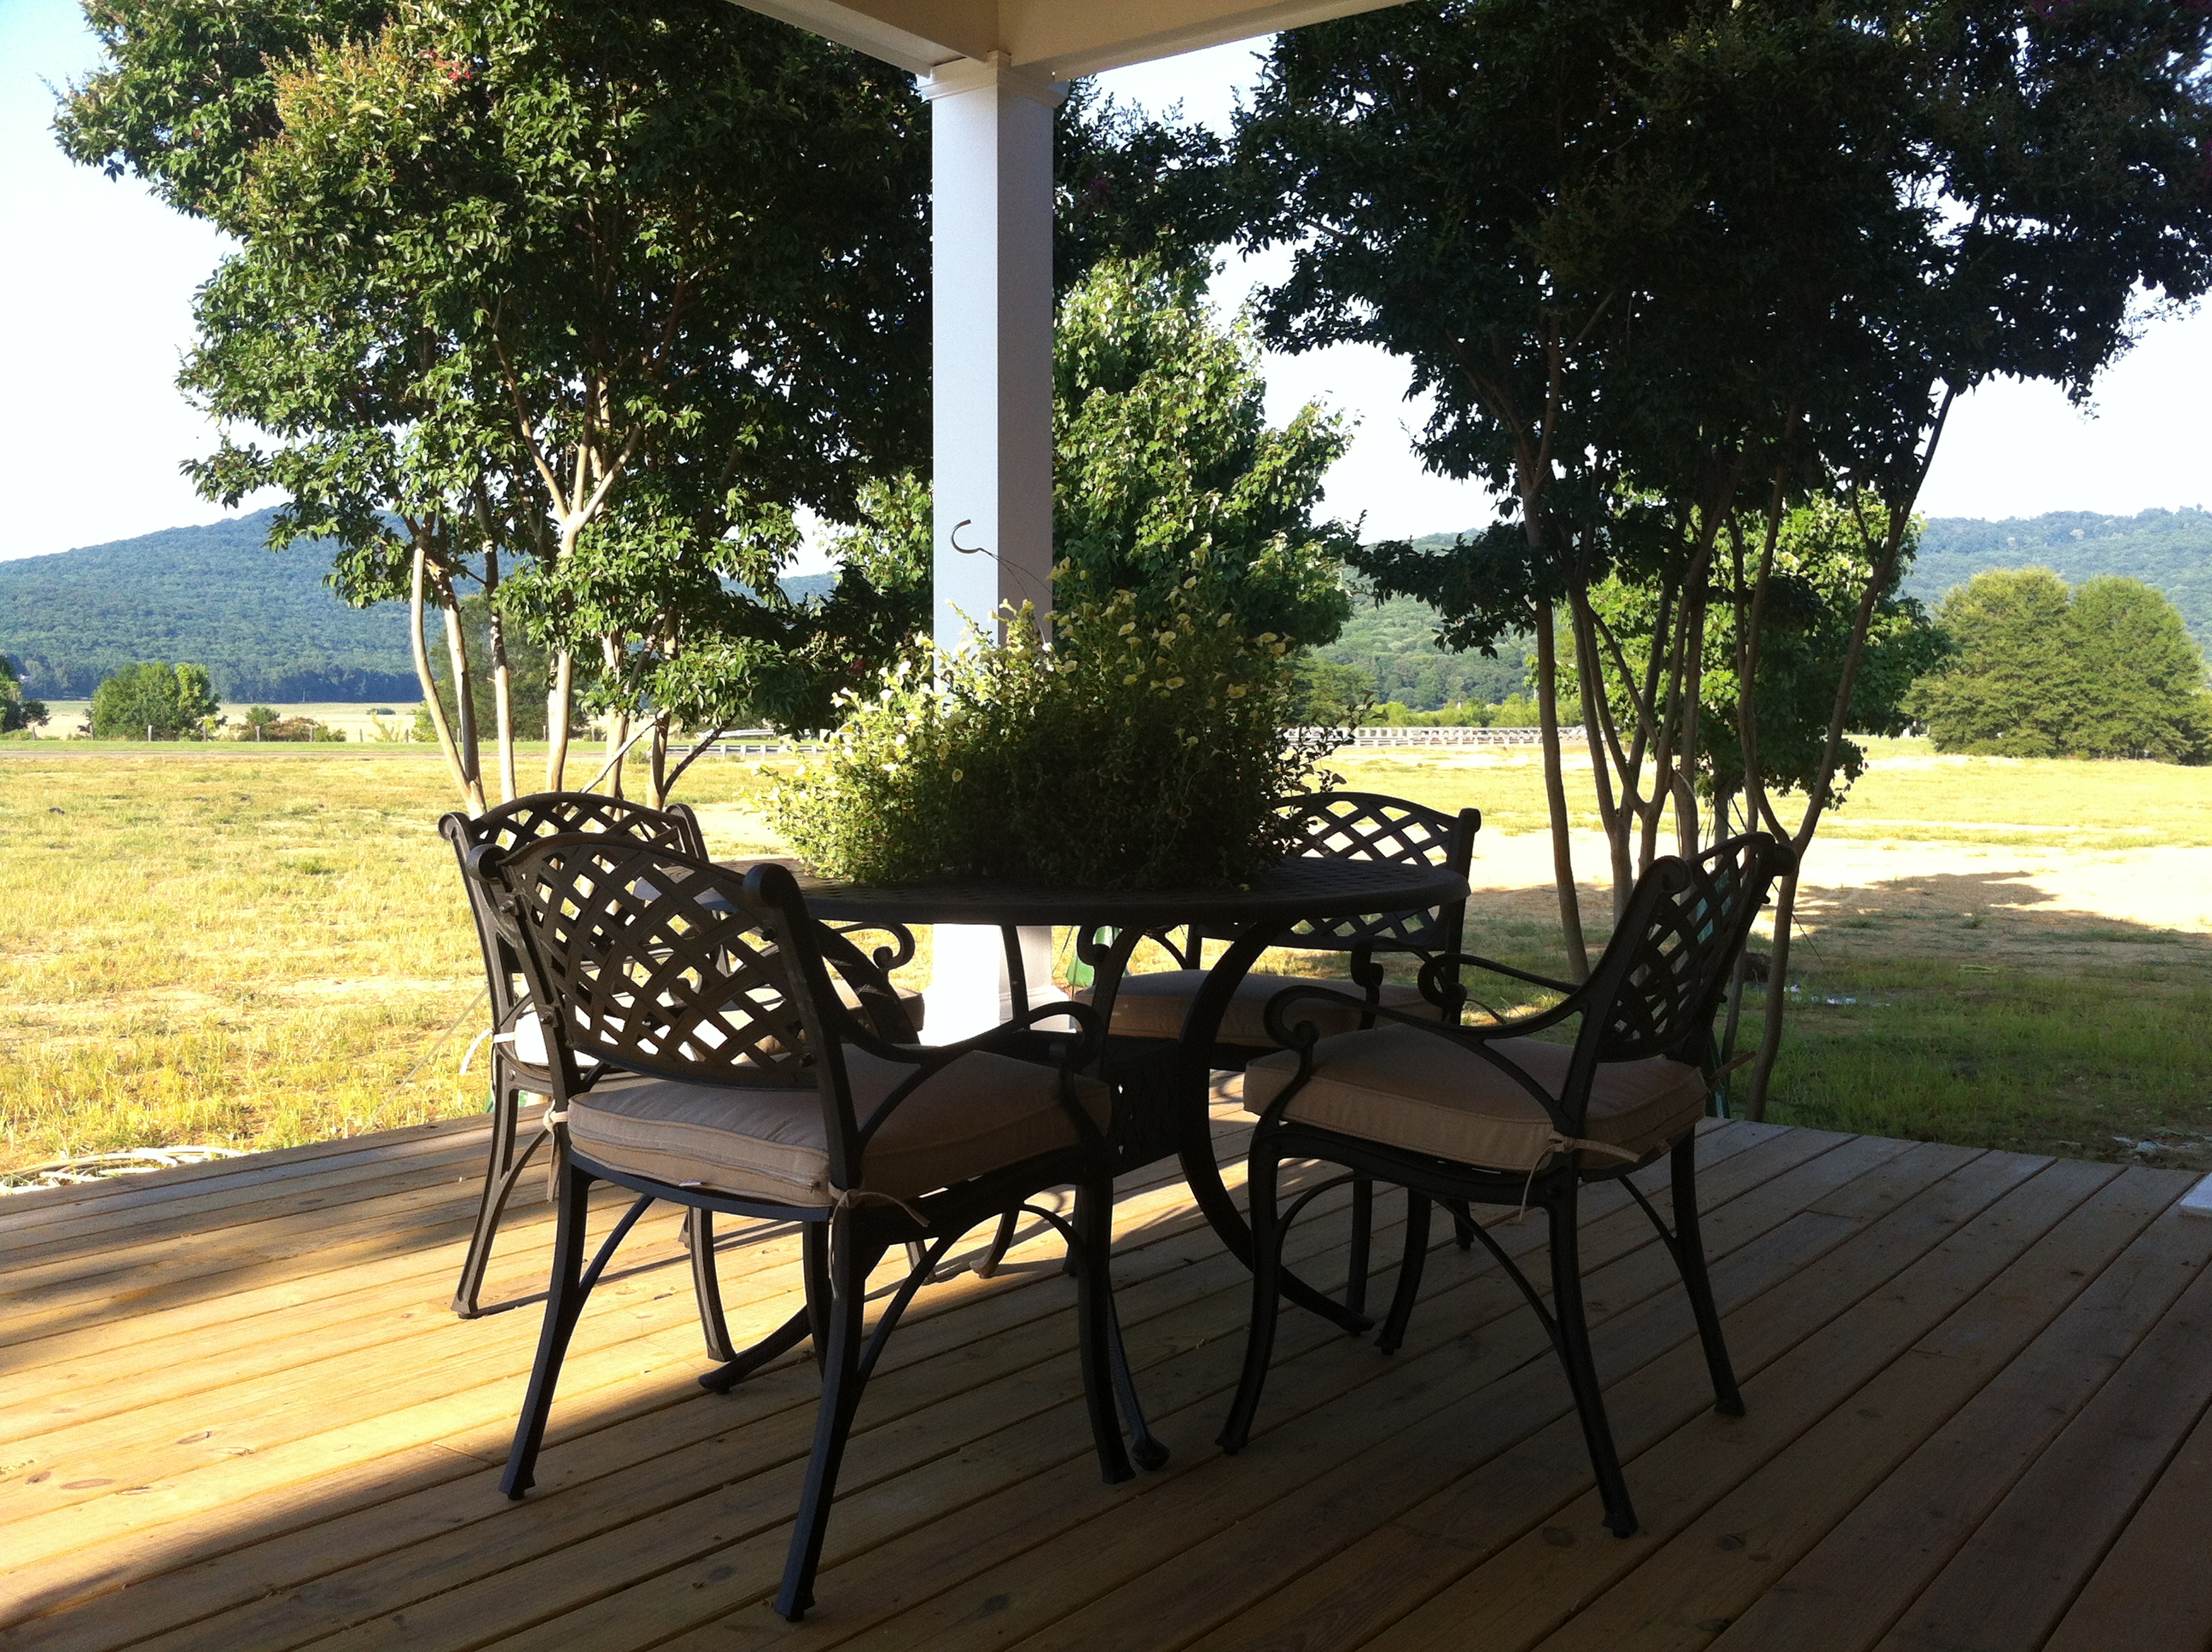 Find some shade, pull up a seat, and chat on our Welcome Center's new Front Porch